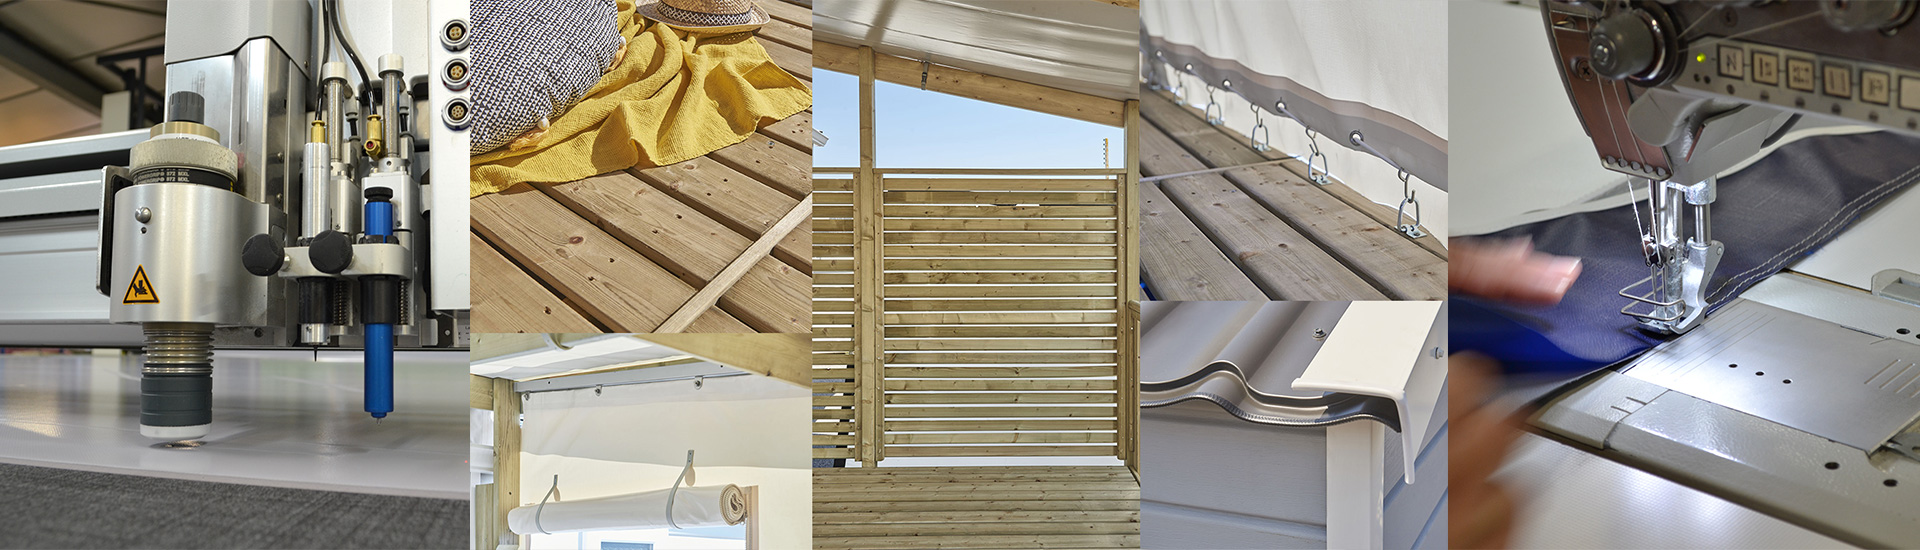 Our expertise: high-quality products and materials created and manufactured in France